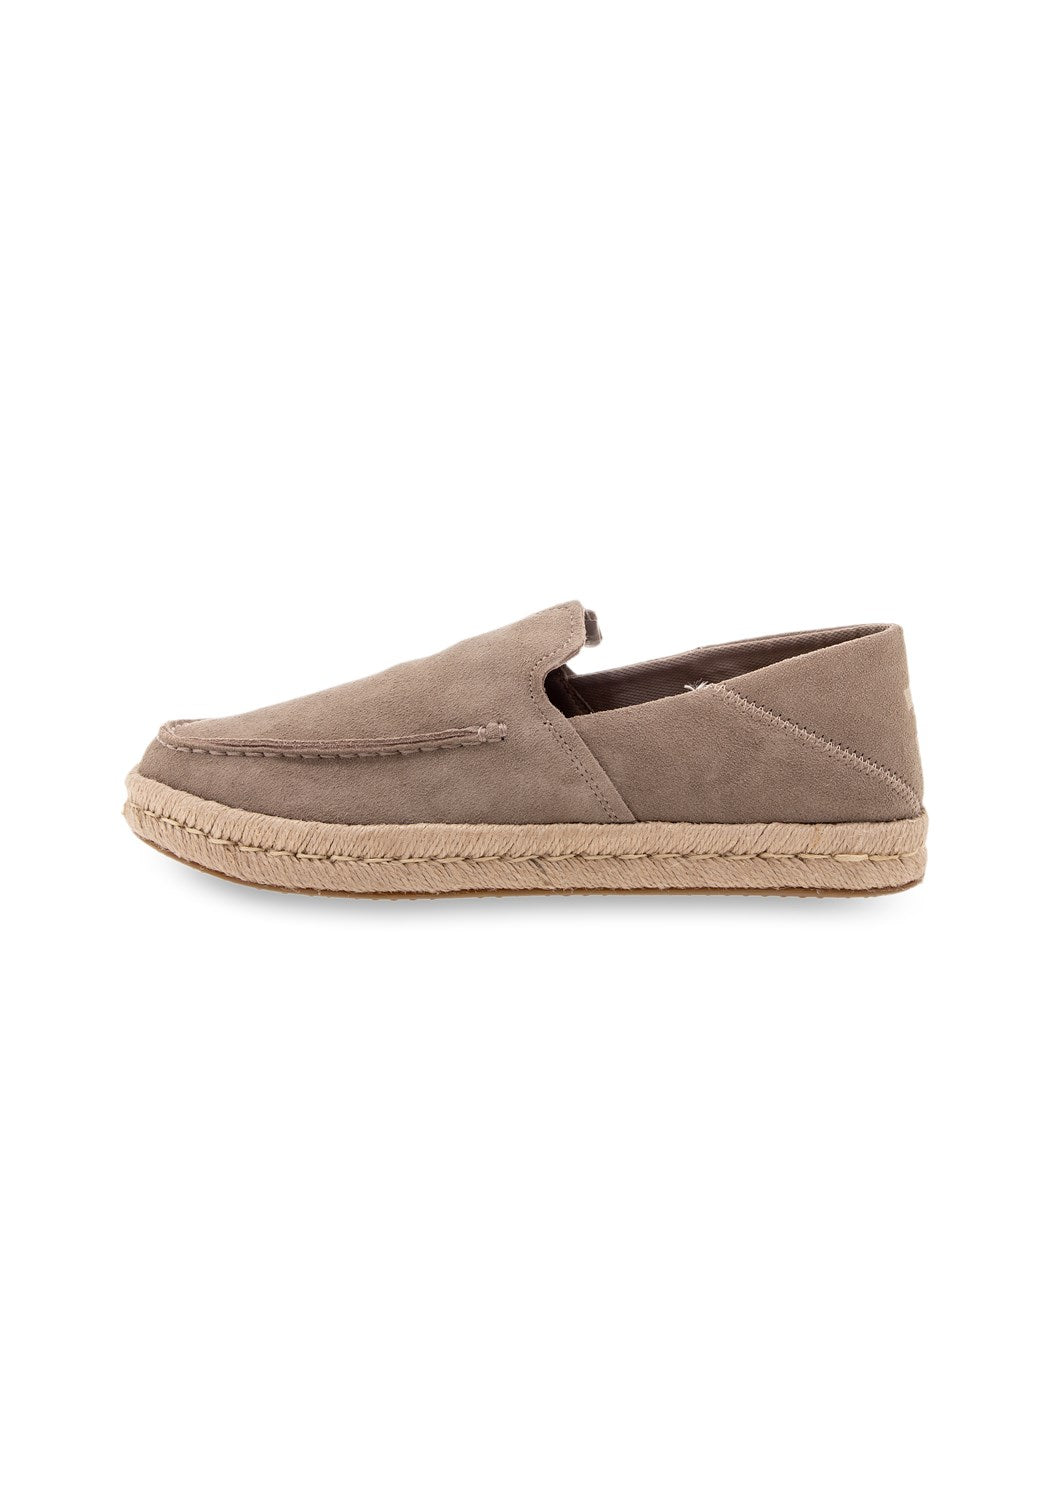 Alonso Loafer Rope taupe | Bildmaterial bereitgestellt von SHOES.PLEASE.